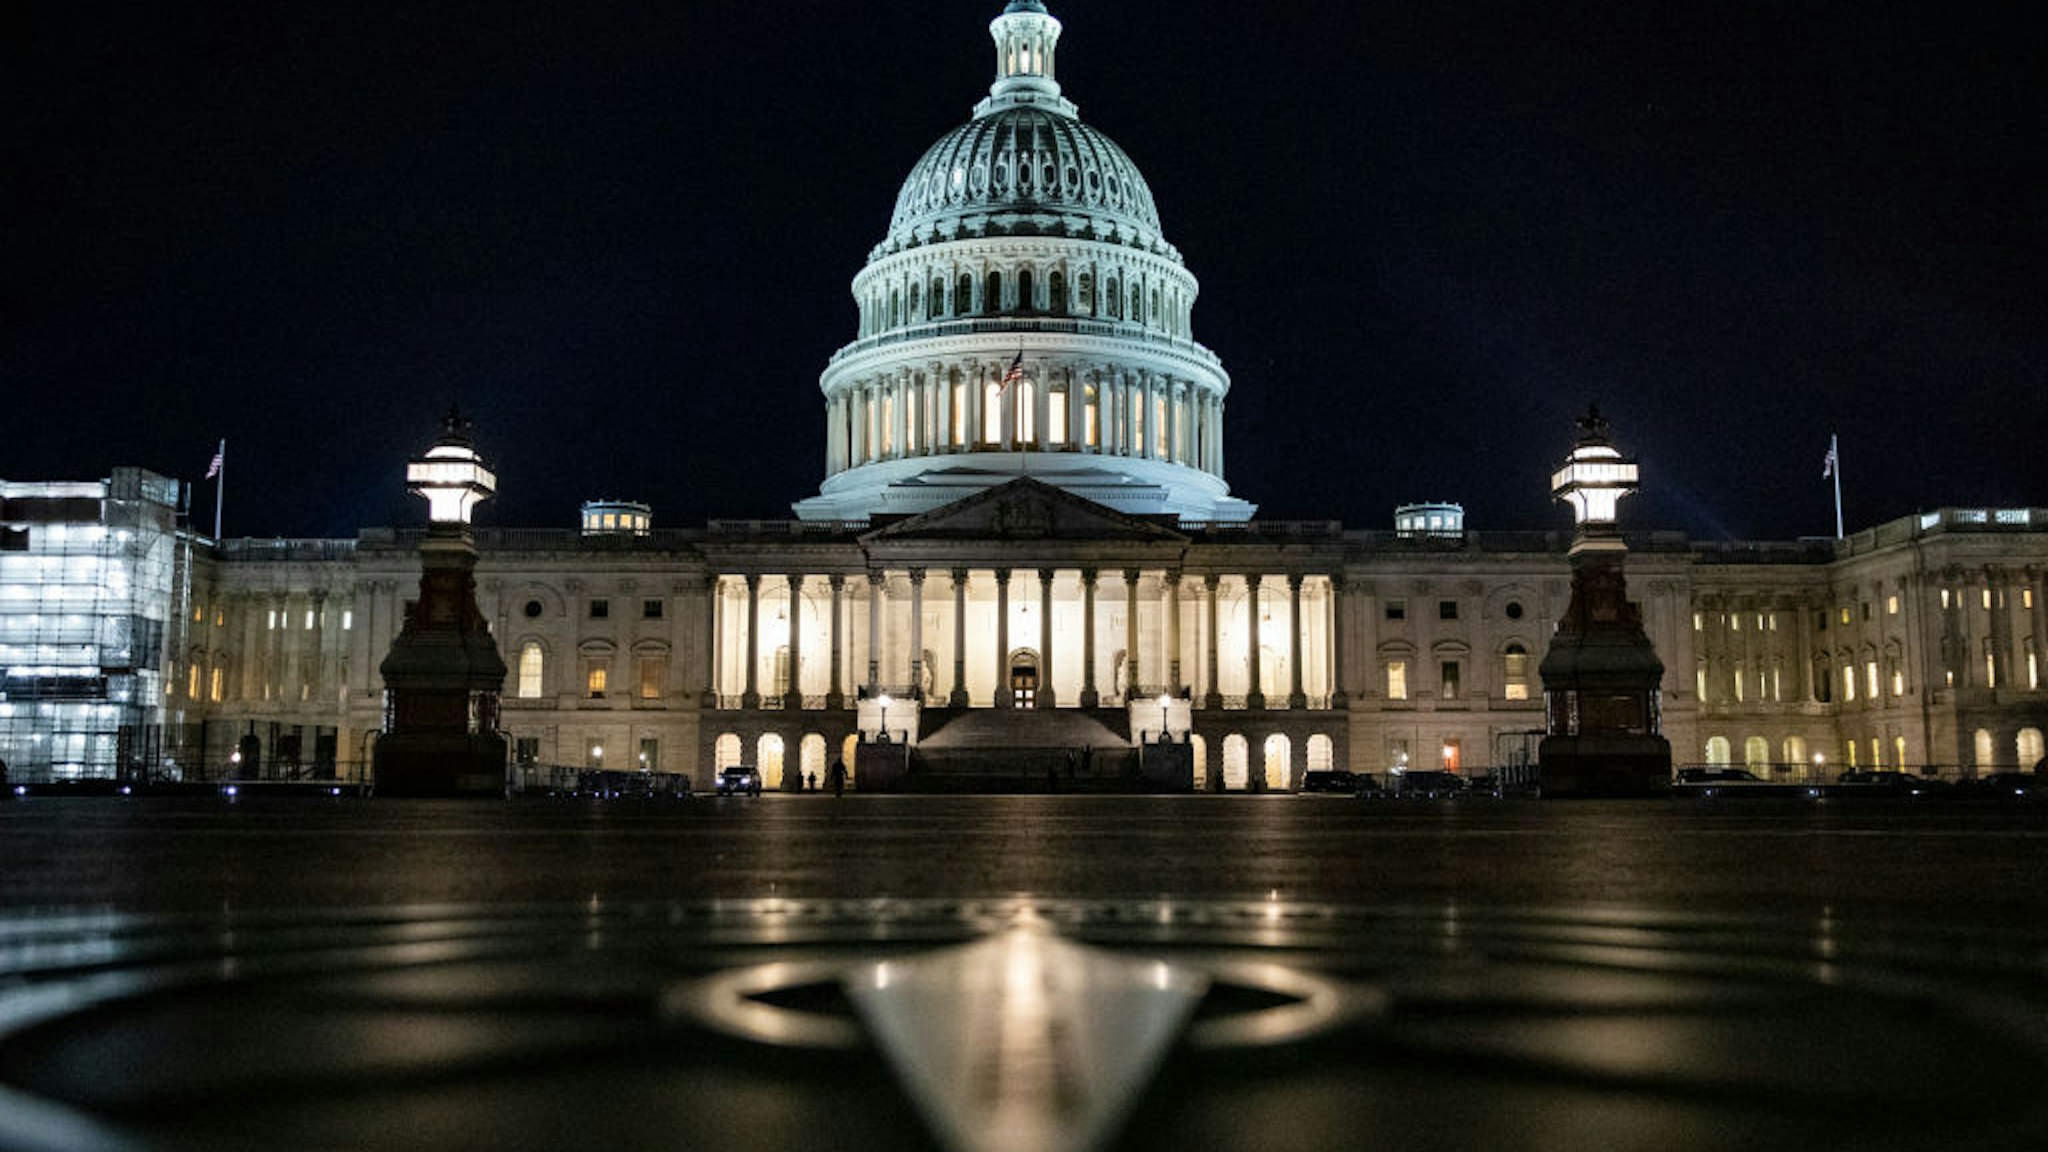 WASHINGTON, DC - JANUARY 29: The Senate impeachment trial of President Donald Trump continues into the night on January 29, 2020 in Washington, DC. Today the trial entered the phase where senators will have the opportunity to submit written questions to the House managers and President Trump's defense team.